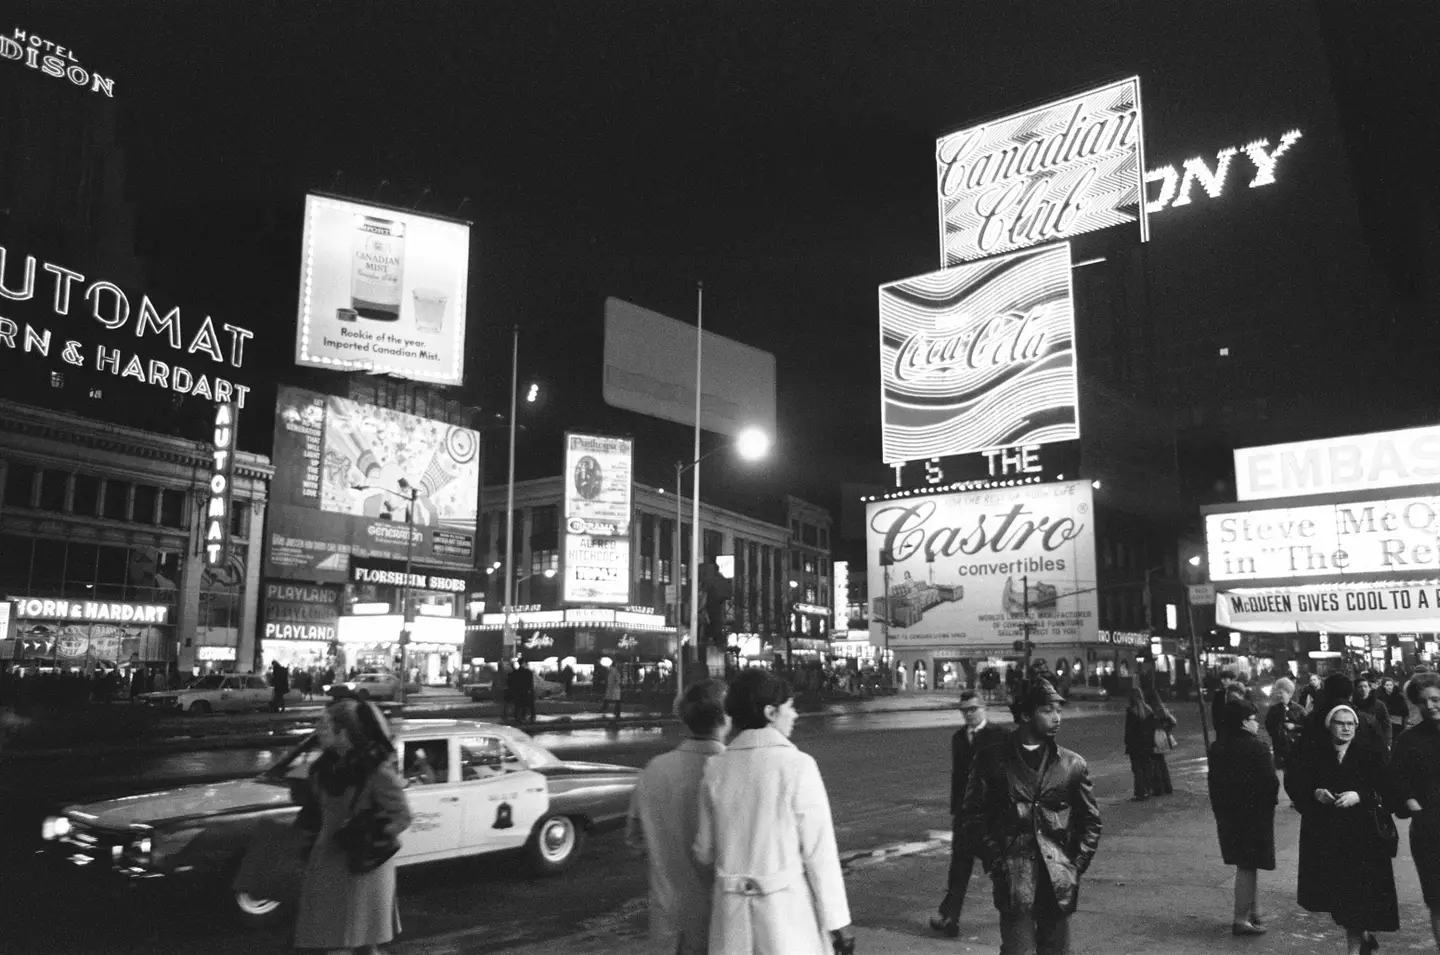 The new doc is set to focus on New York's Times Square in the late 1970s and early 1980s (